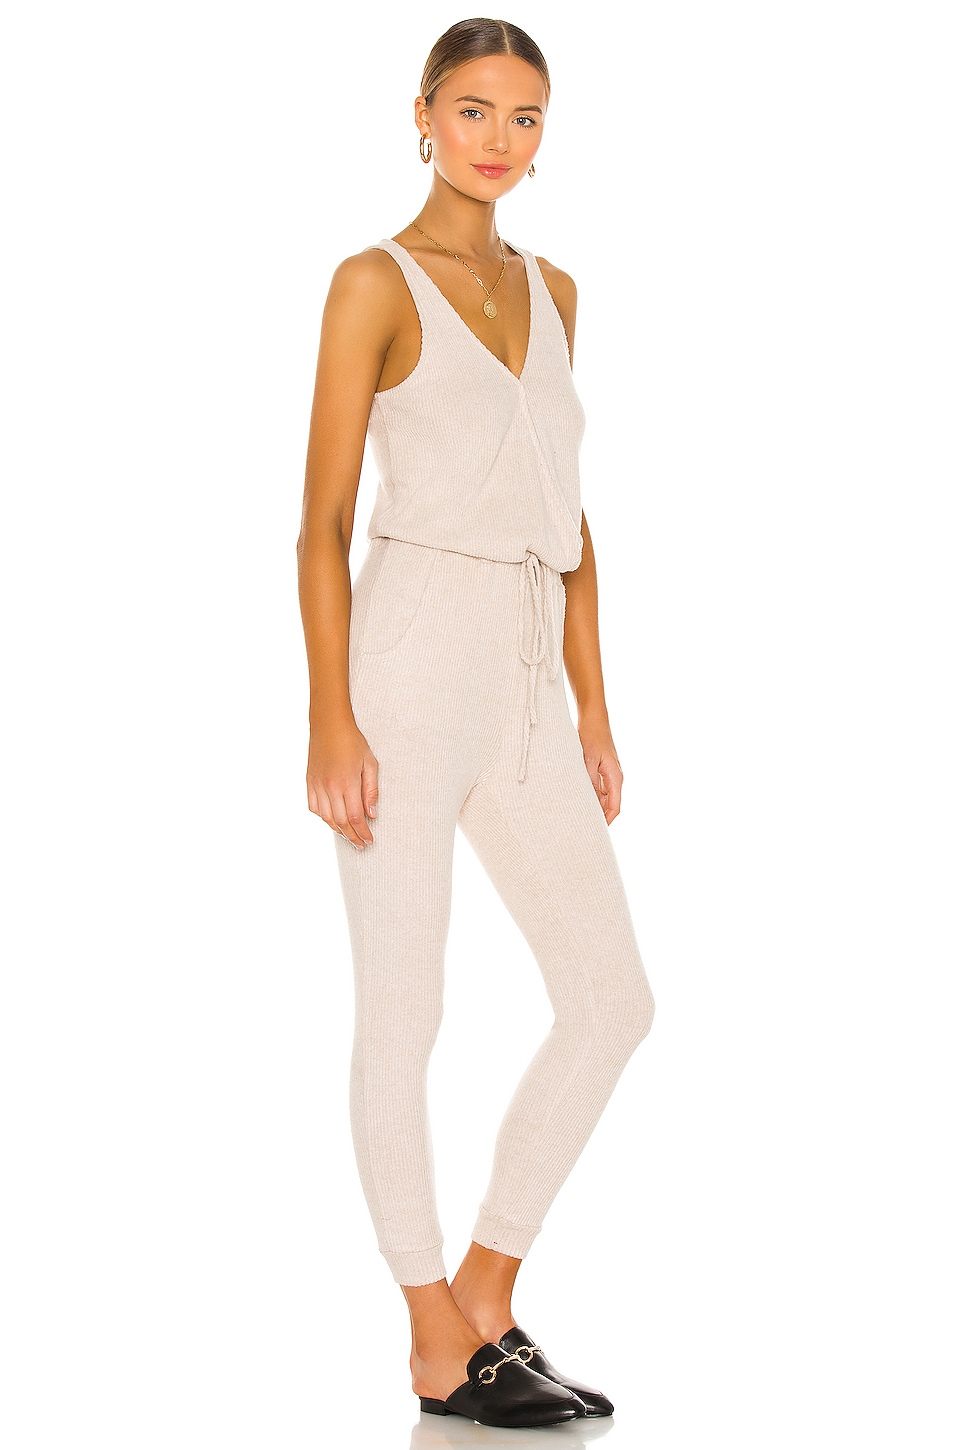 LBLC The Label Samantha Jumpsuit in Oatmeal | REVOLVE